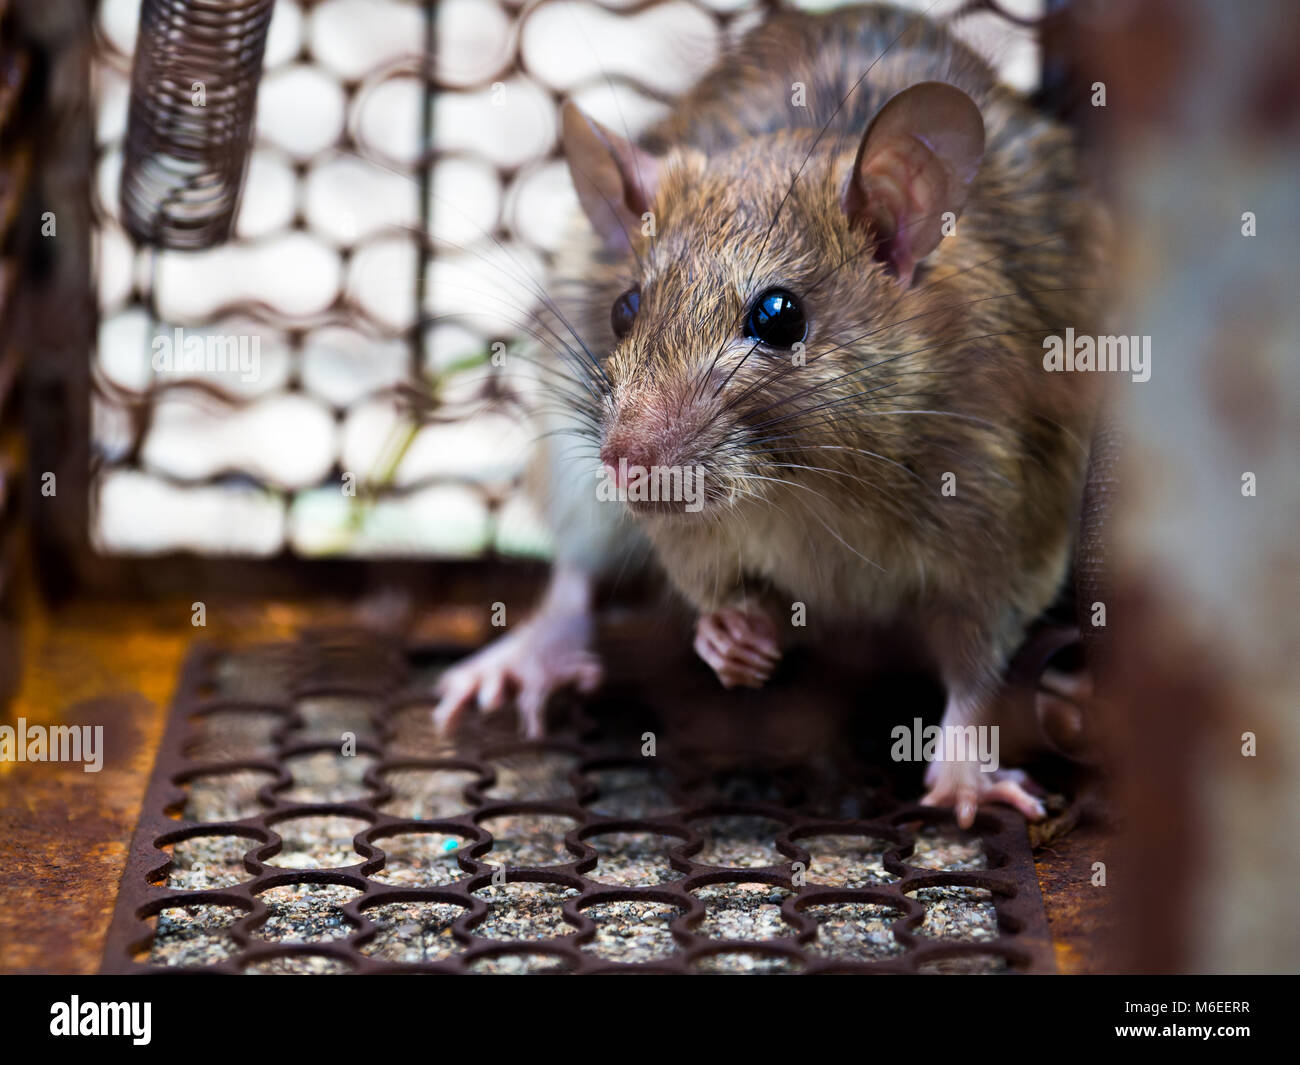 https://c8.alamy.com/comp/M6EERR/the-rat-was-in-a-cage-catching-a-rat-the-rat-has-contagion-the-disease-M6EERR.jpg